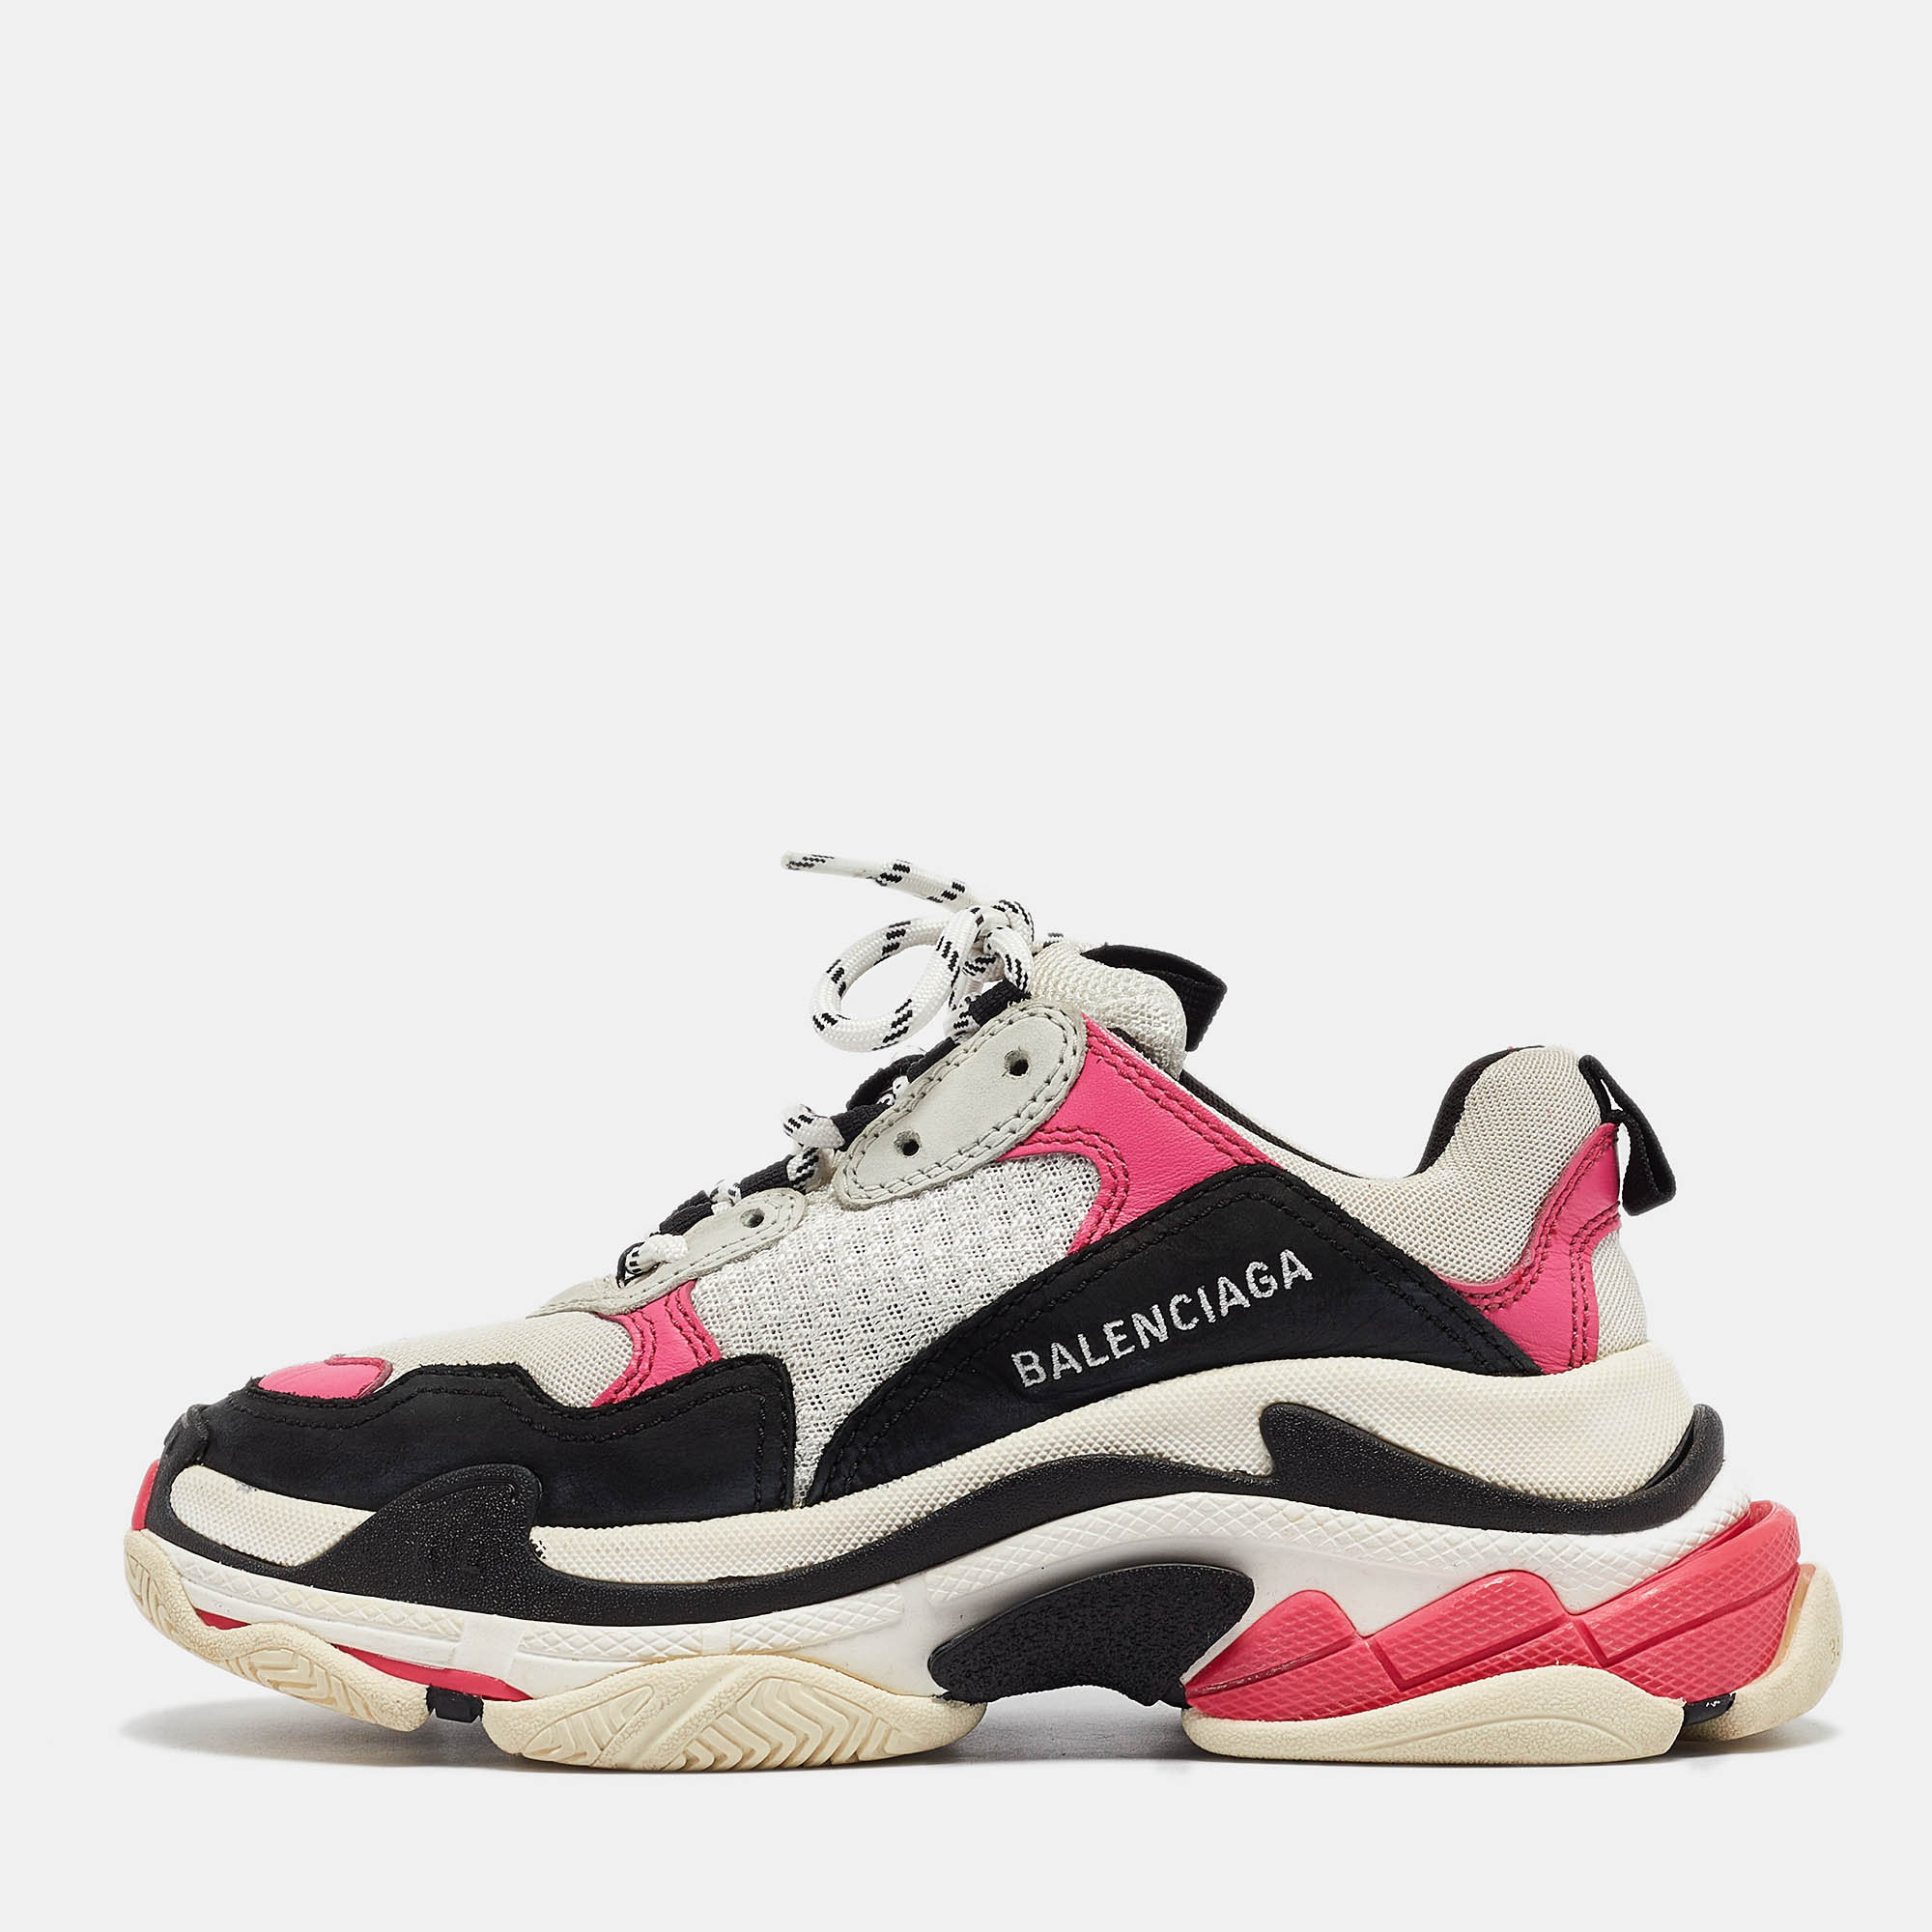 Balenciaga tricolor mesh and leather triple s sneakers size 37